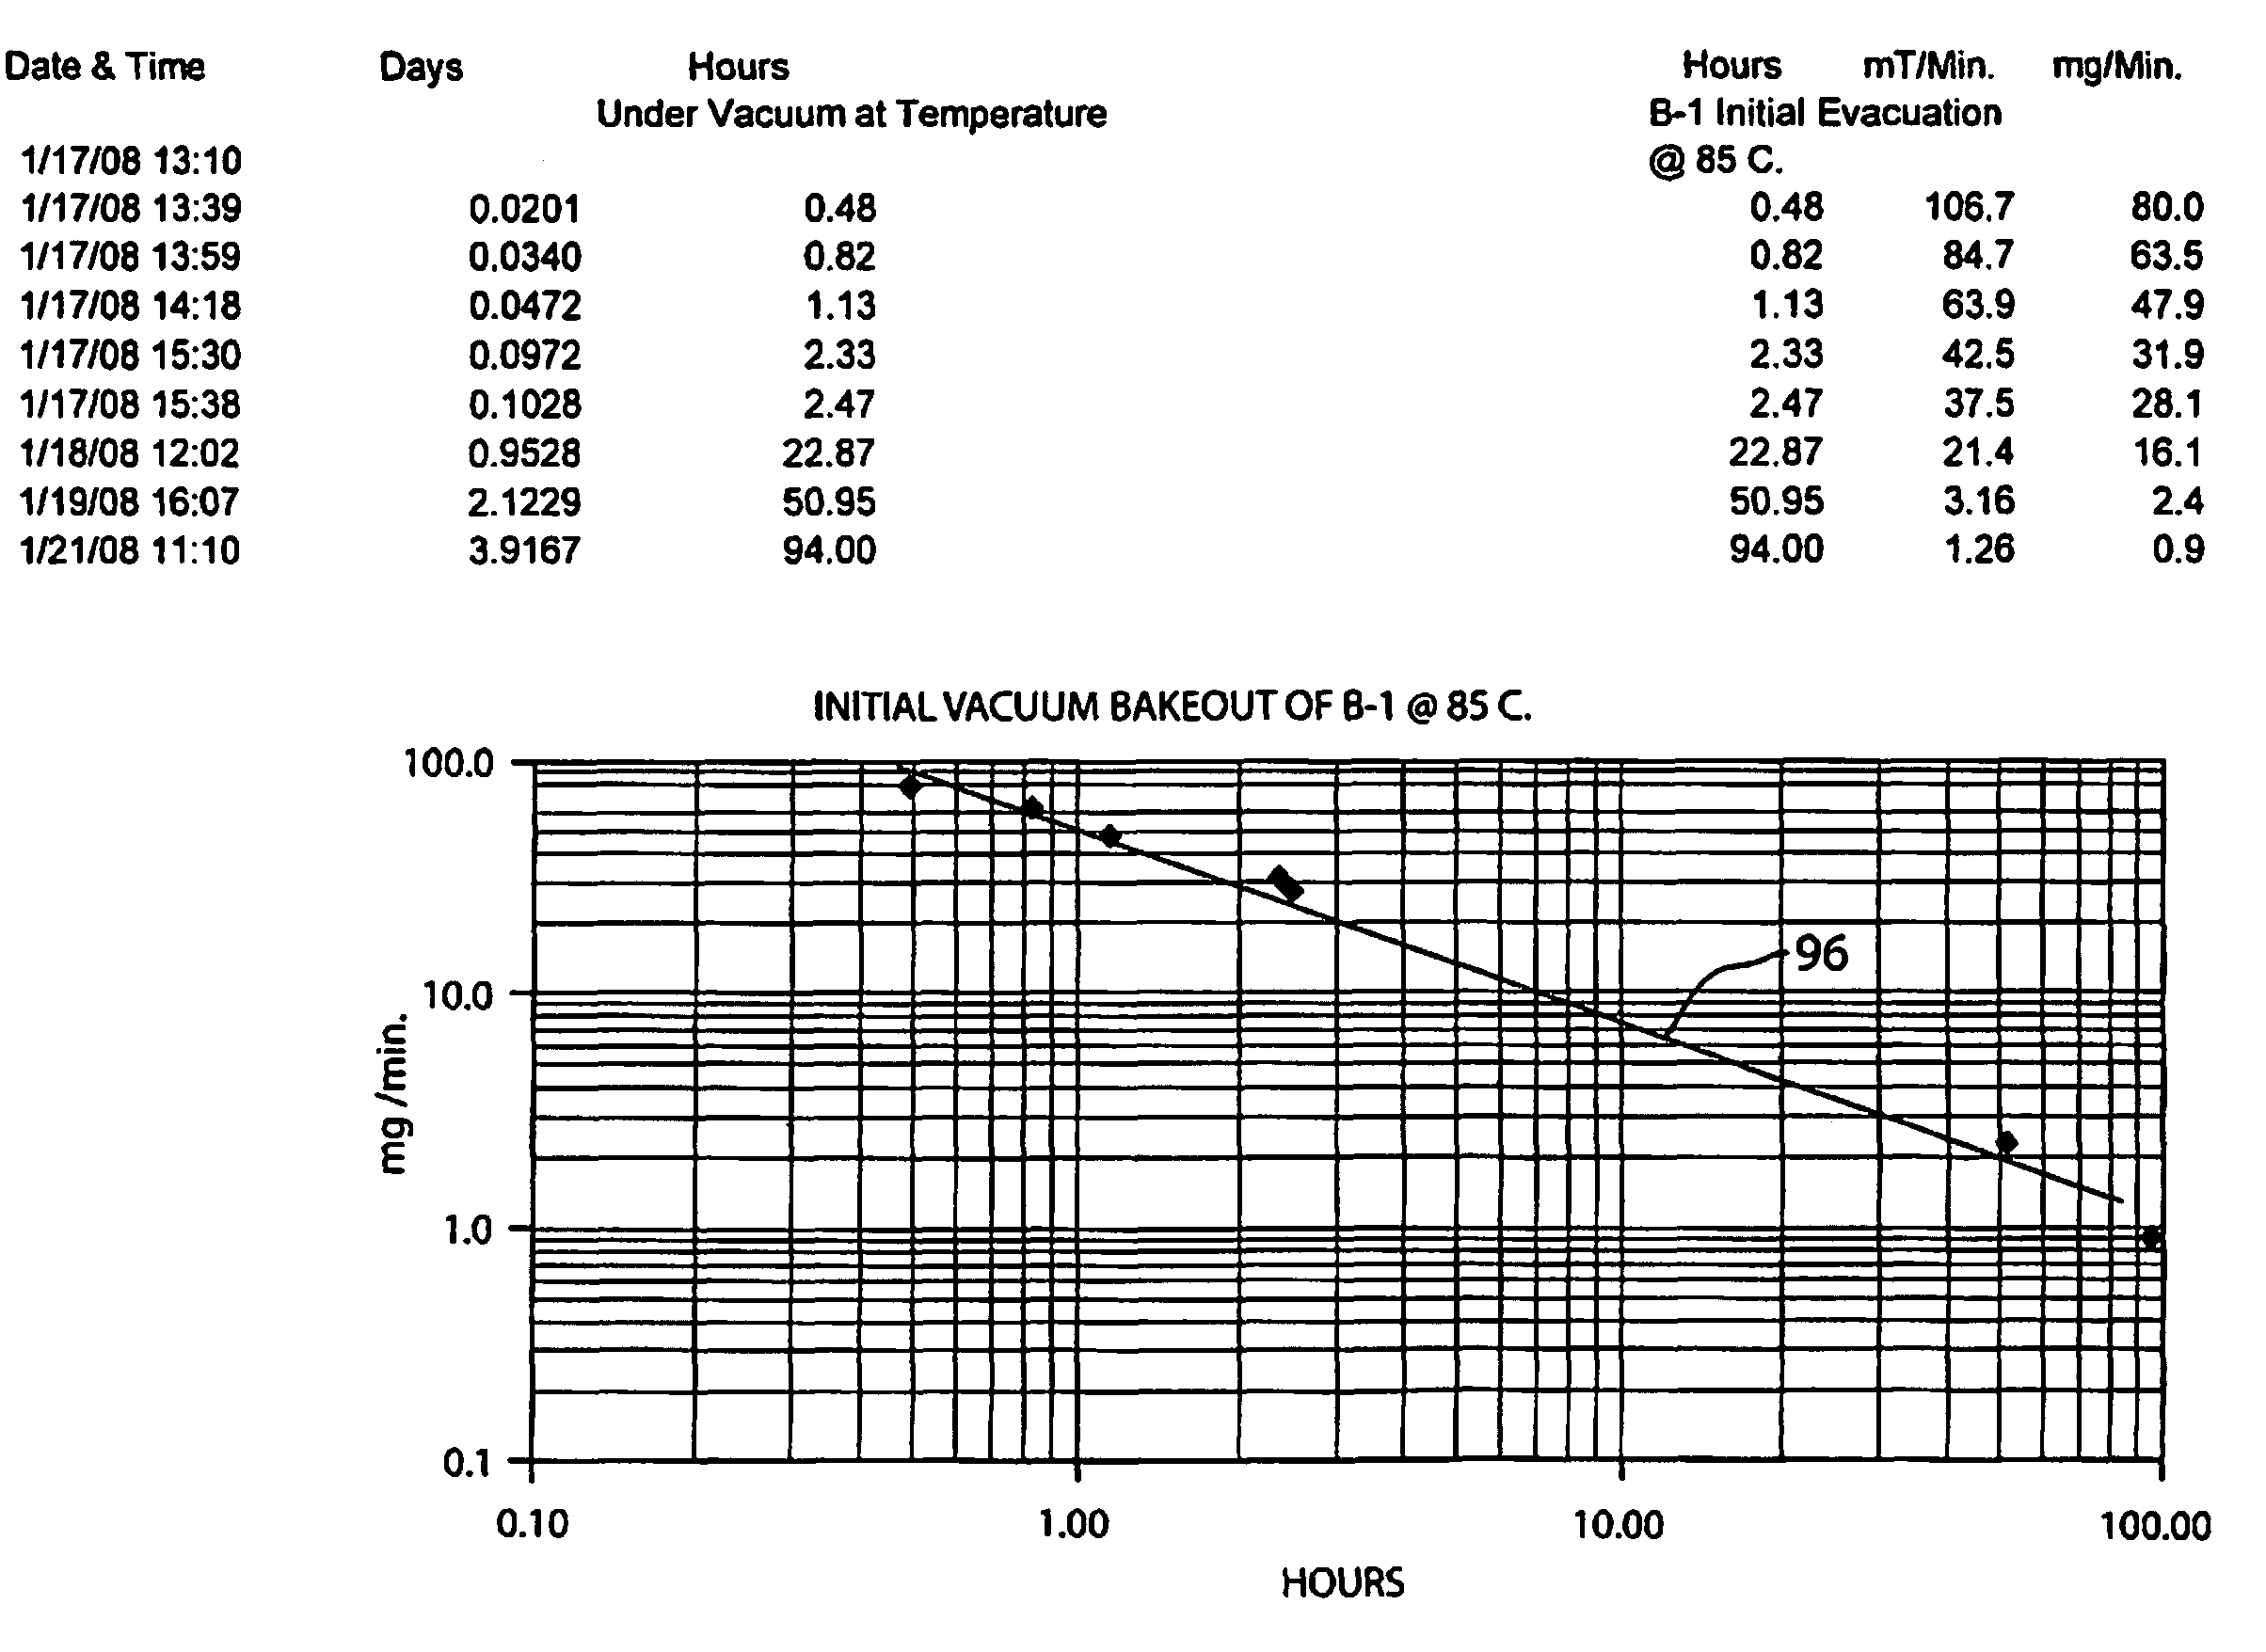 Method for improving or reconditioning FCR APG-68 tactical radar units